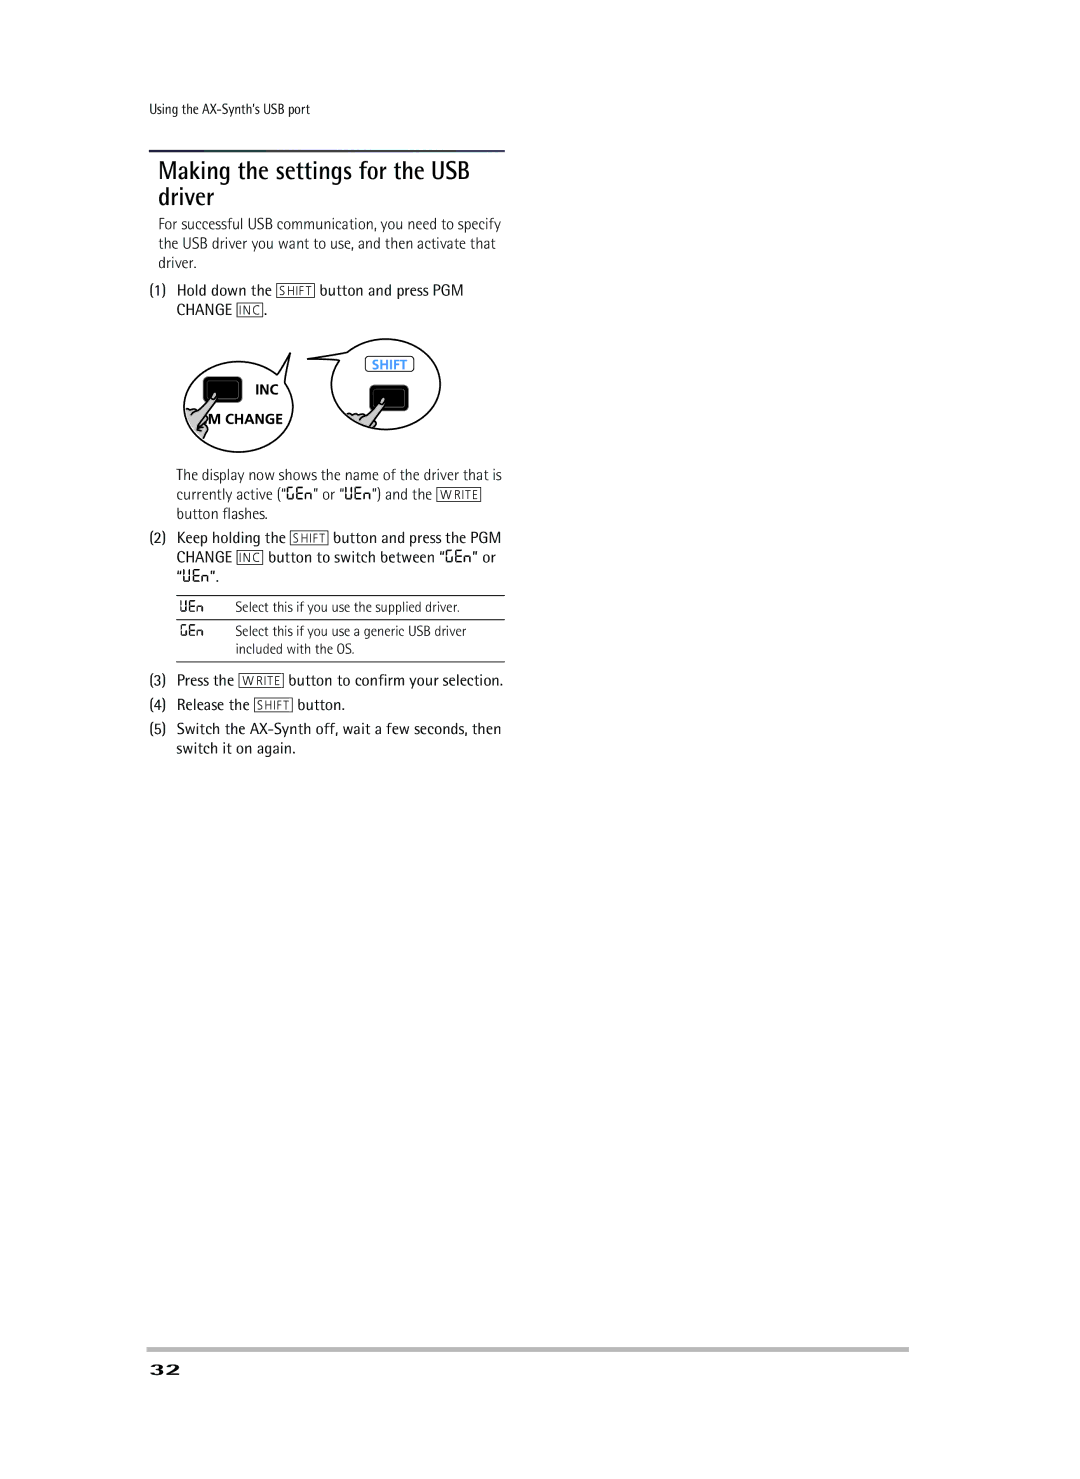 Roland AX-Synth owner manual Making the settings for the USB driver 